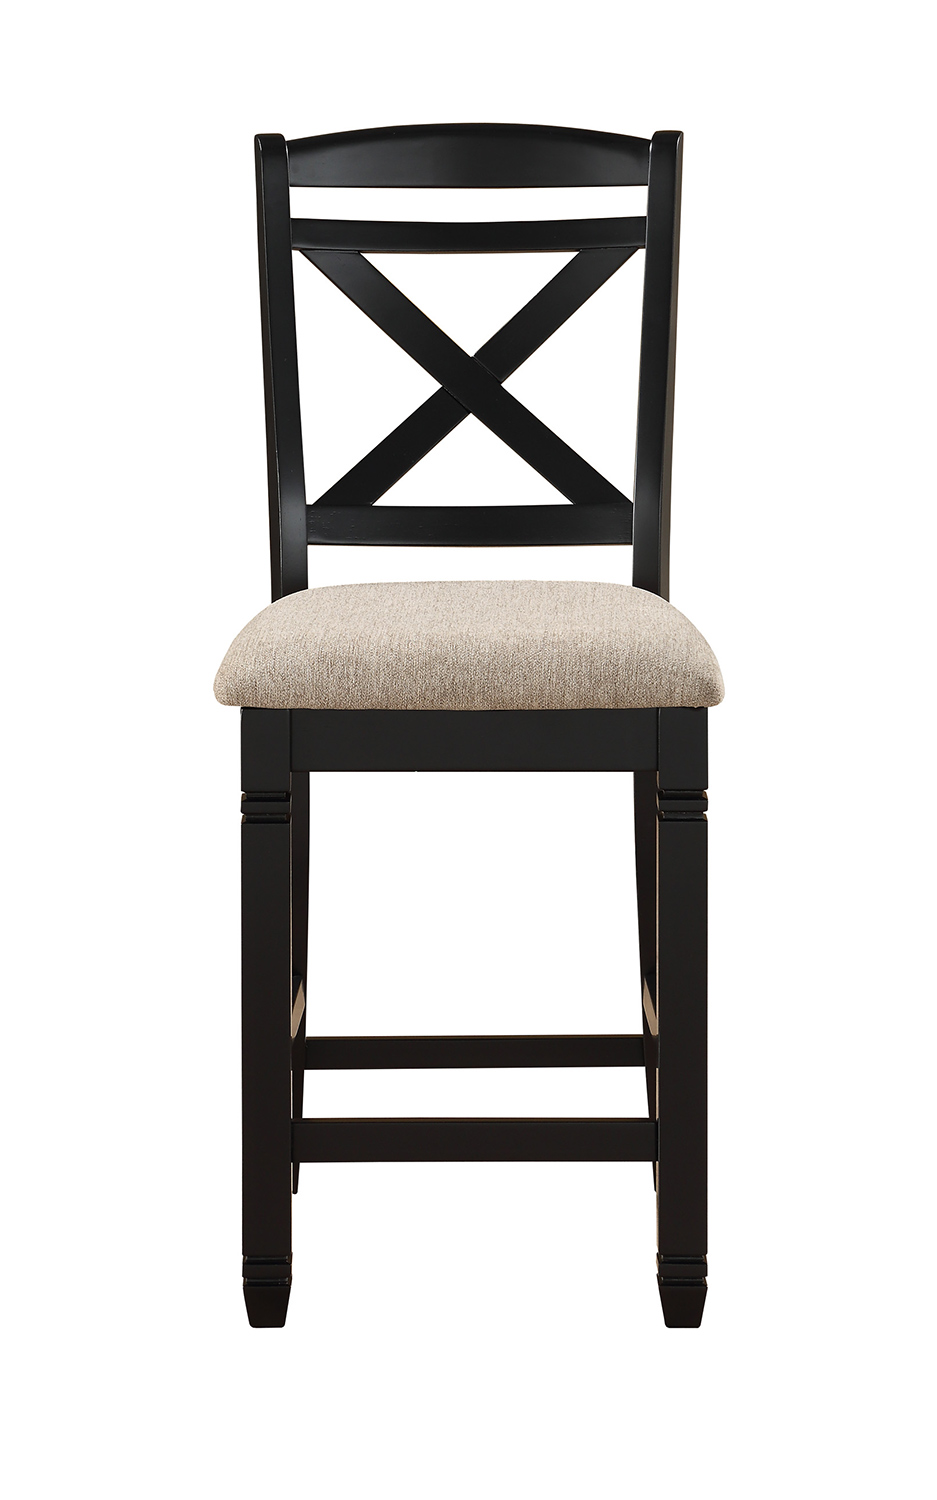 Homelegance Baywater Counter Height Chair - Black -Natural